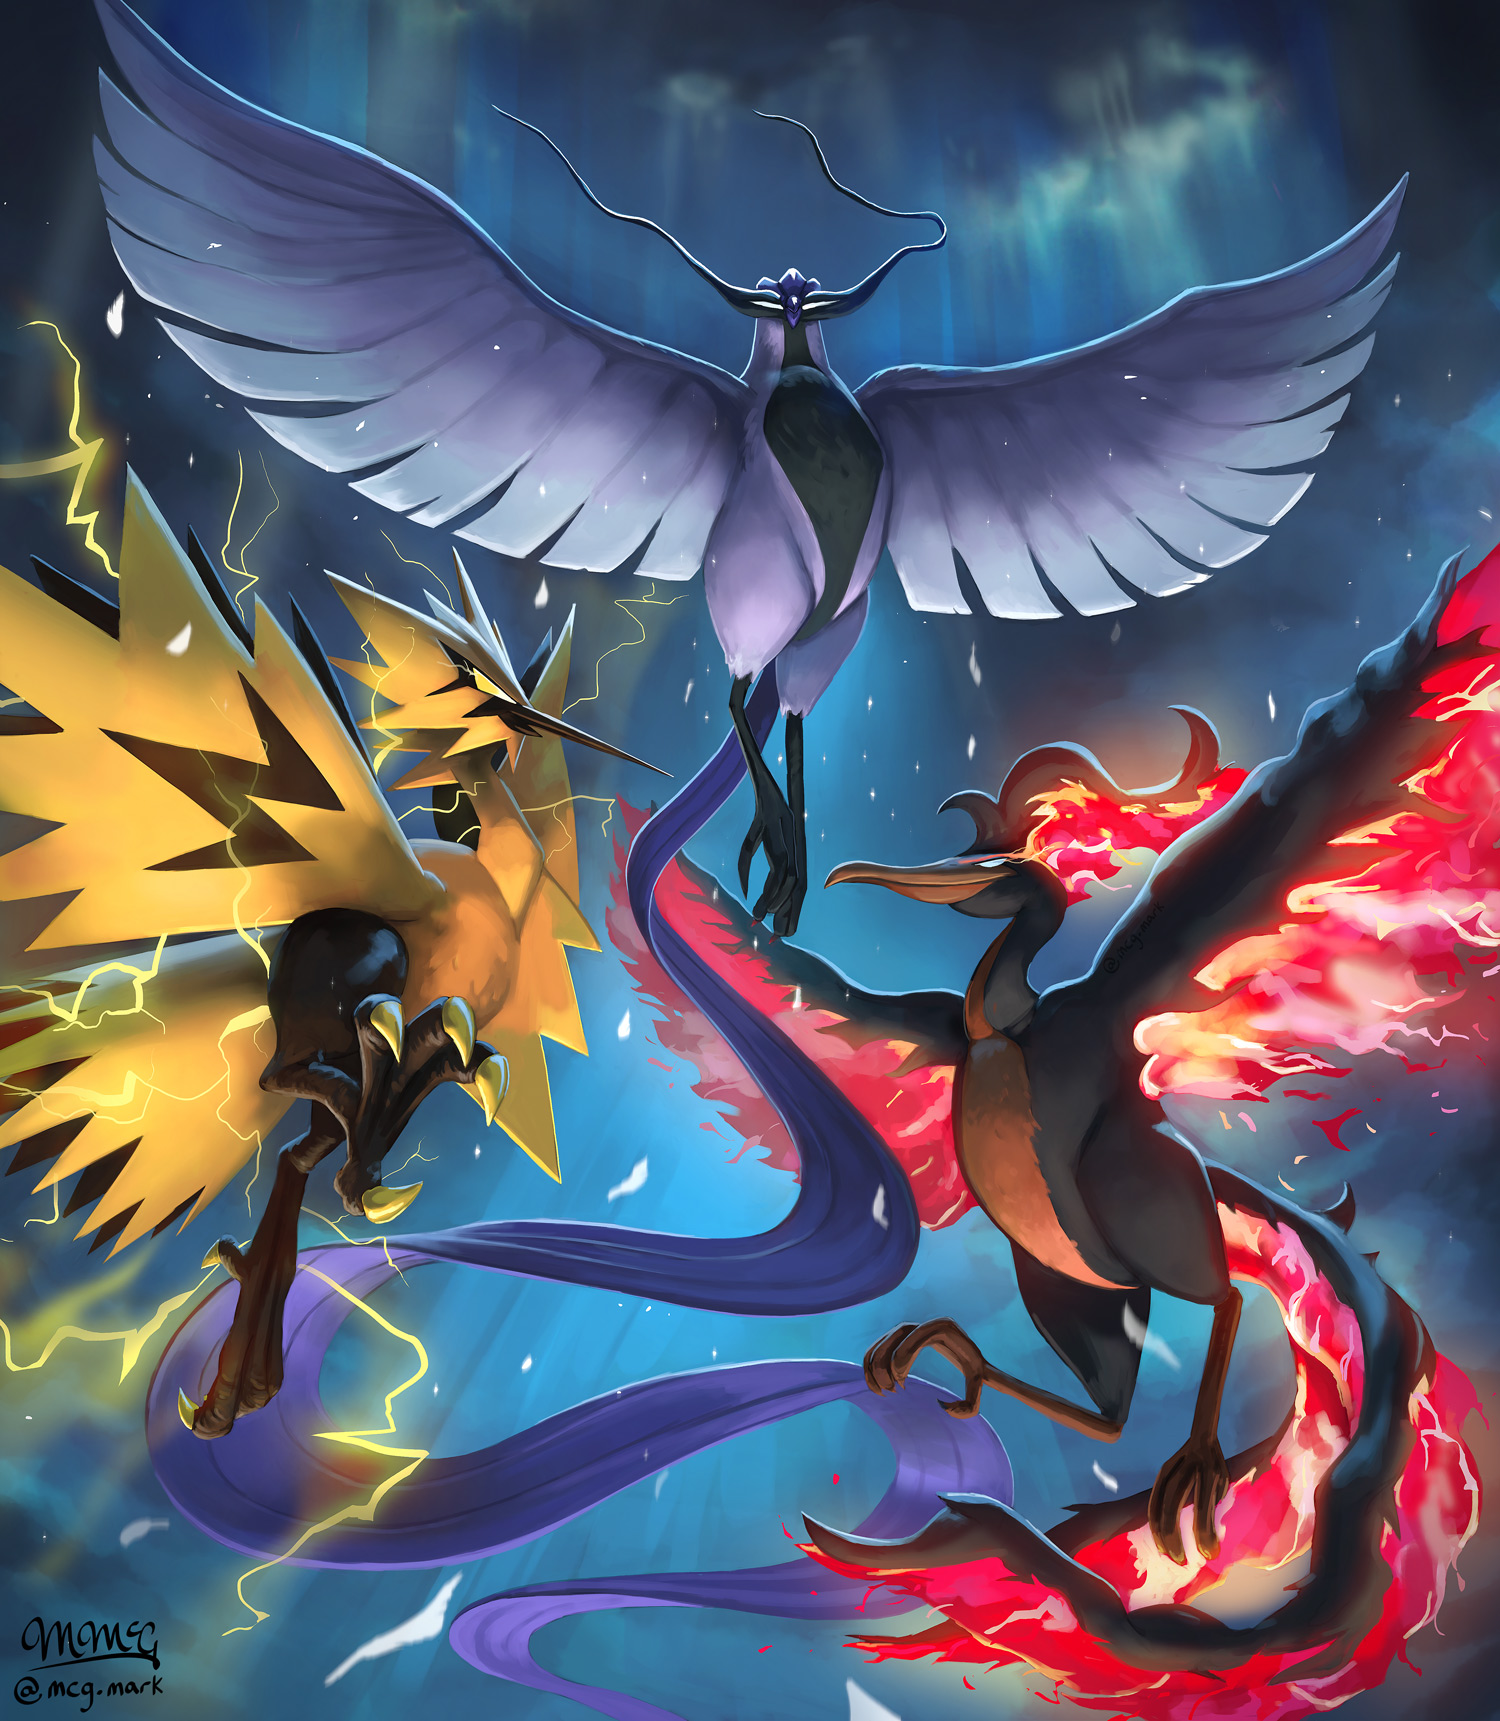 The legendary birds: Articuno, Moltres and Zapdos by LookDem on DeviantArt